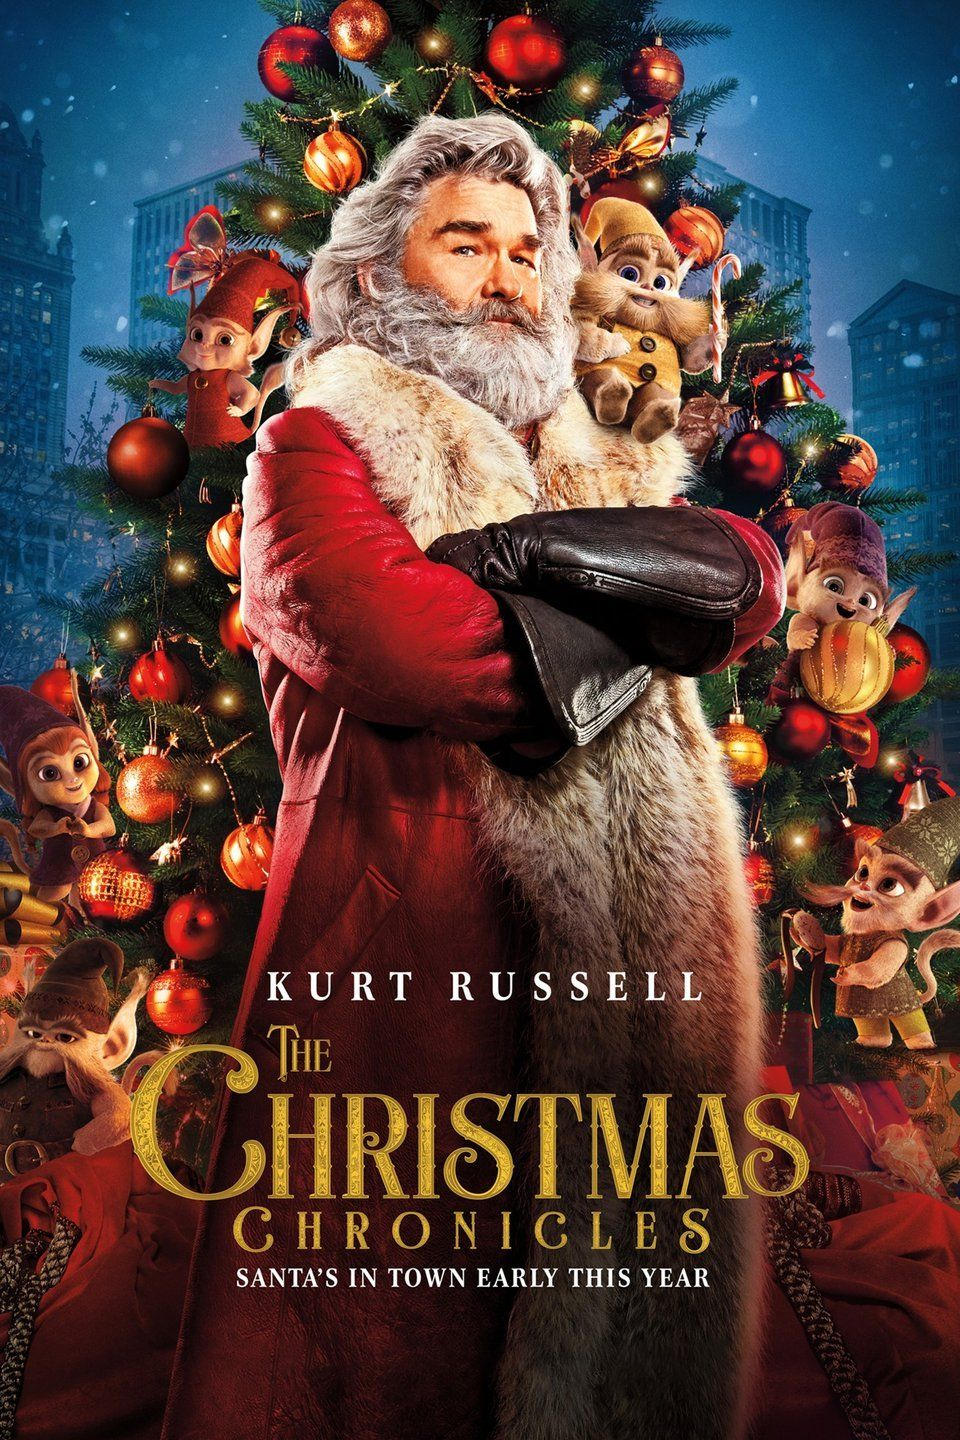 Have a Christmas Netflix Marathon With These Movies Available Right Now. Best christmas movies, Christmas movies, Best holiday movies